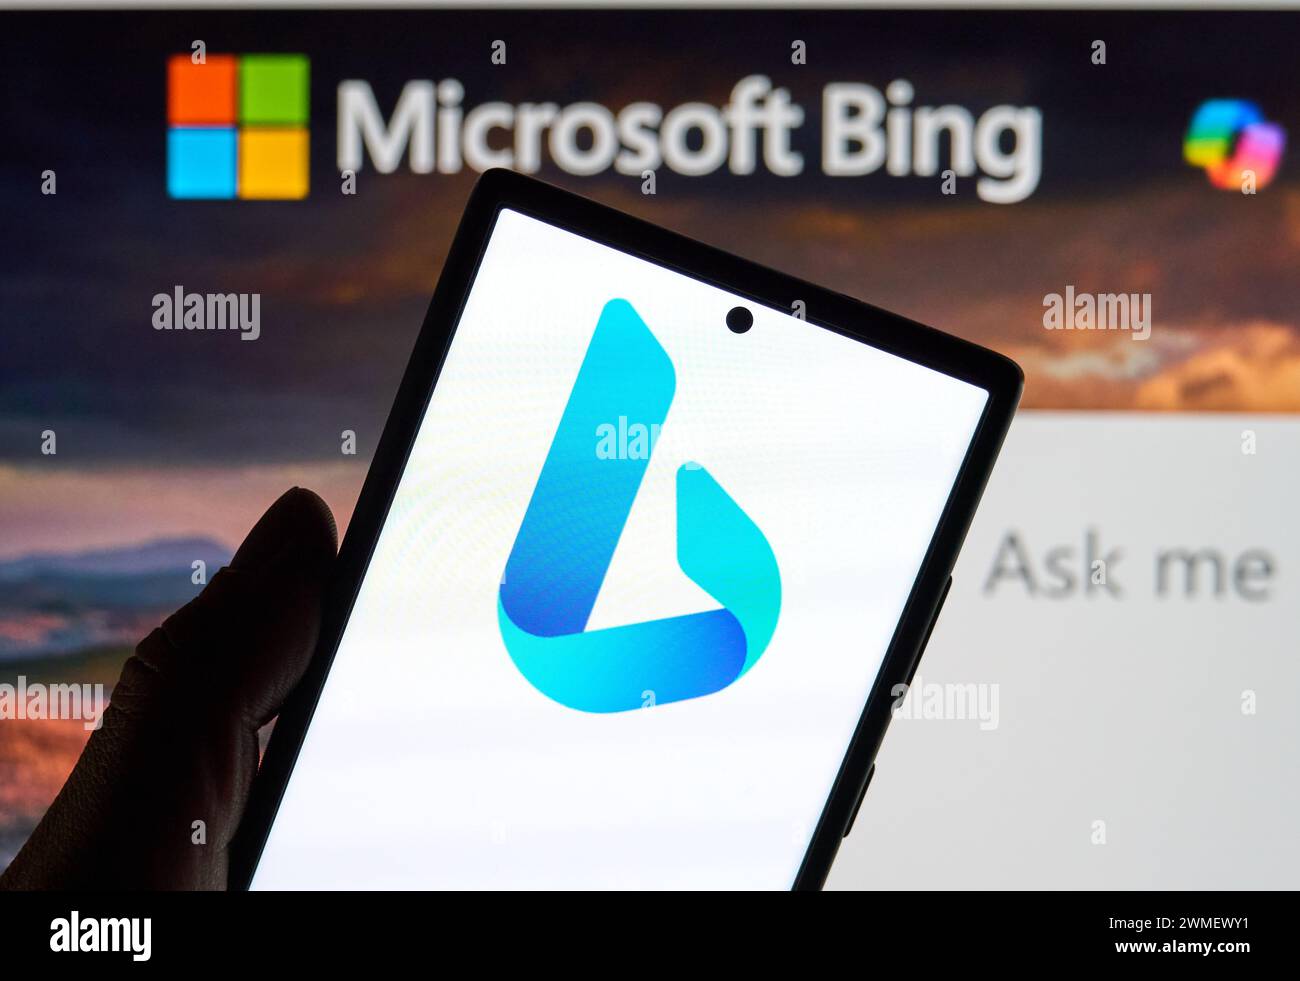 Dallas TX, USA - February 24, 2024: Microsoft Bing logo on a cellphone along with ChatGPT logo. Microsoft Bing offers its own AI-powered search and ch Stock Photo